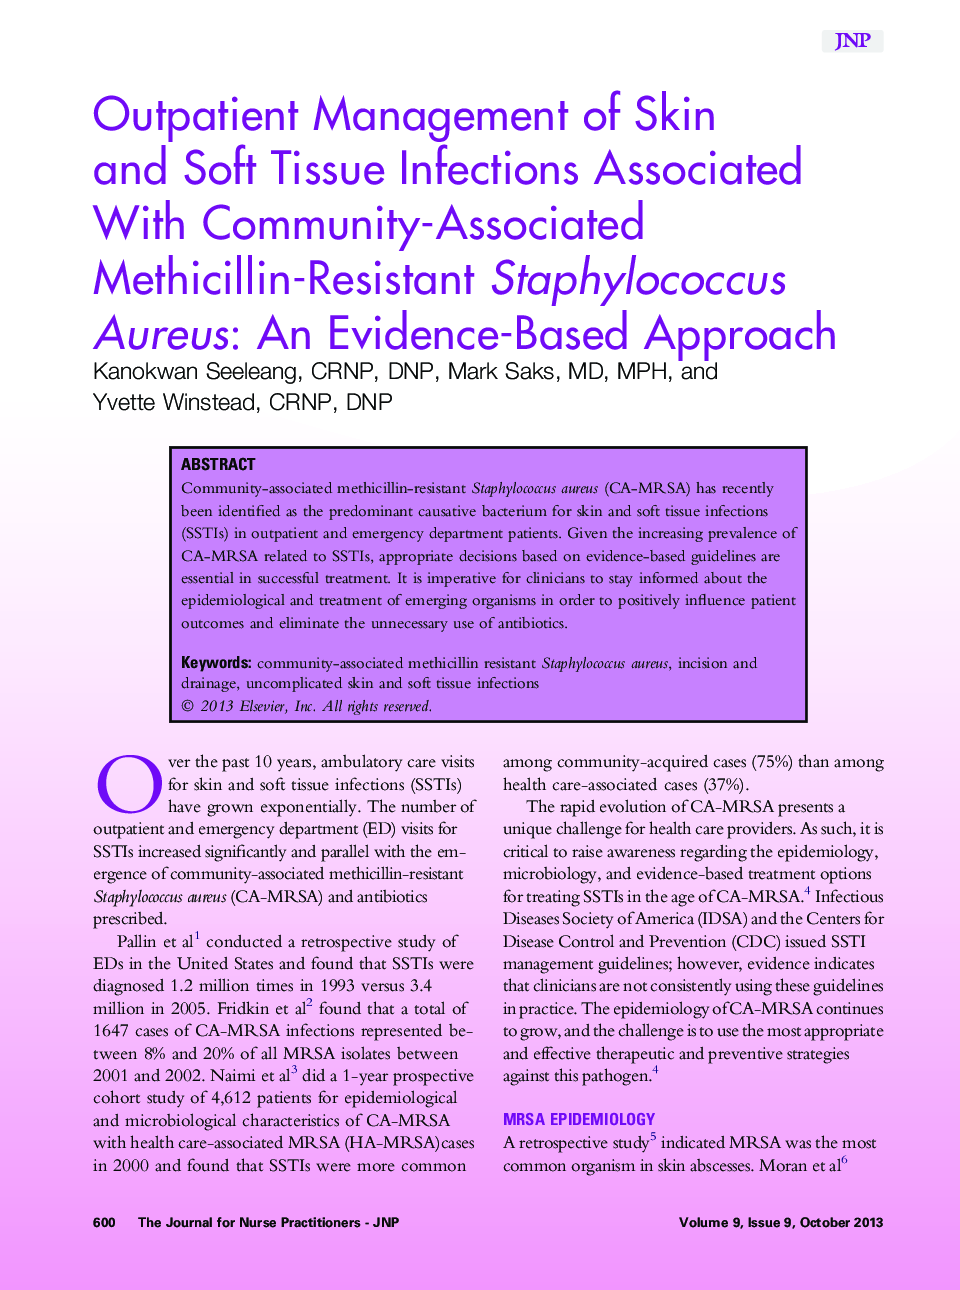 Outpatient Management of Skin and Soft Tissue Infections Associated With Community-Associated Methicillin-Resistant Staphylococcus Aureus: An Evidence-Based Approach 